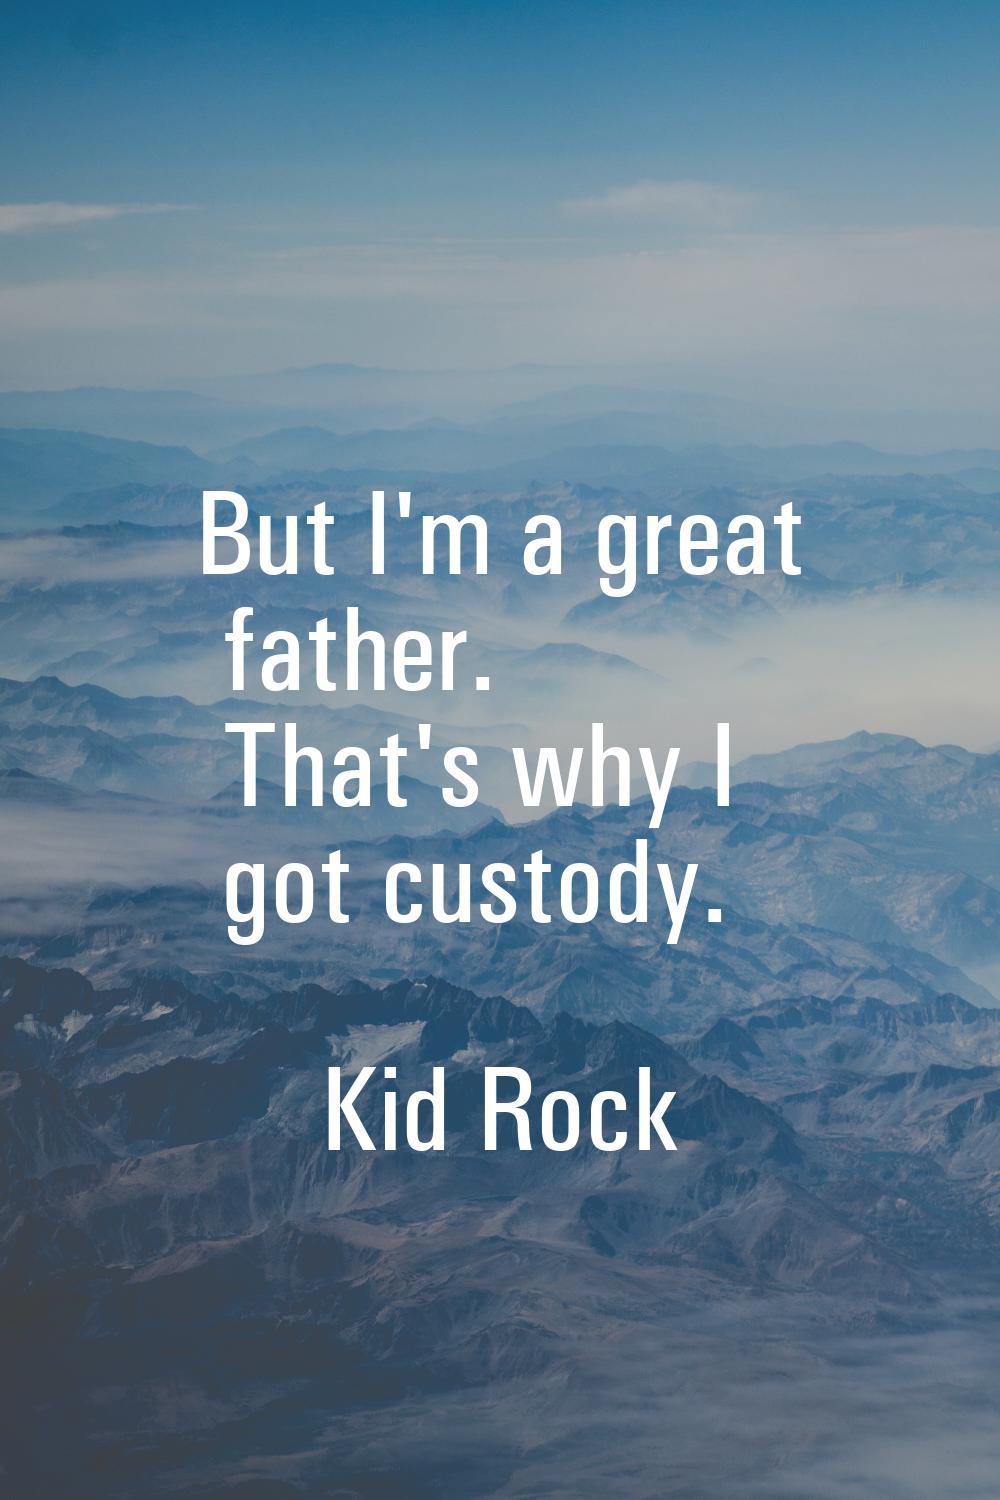 But I'm a great father. That's why I got custody.